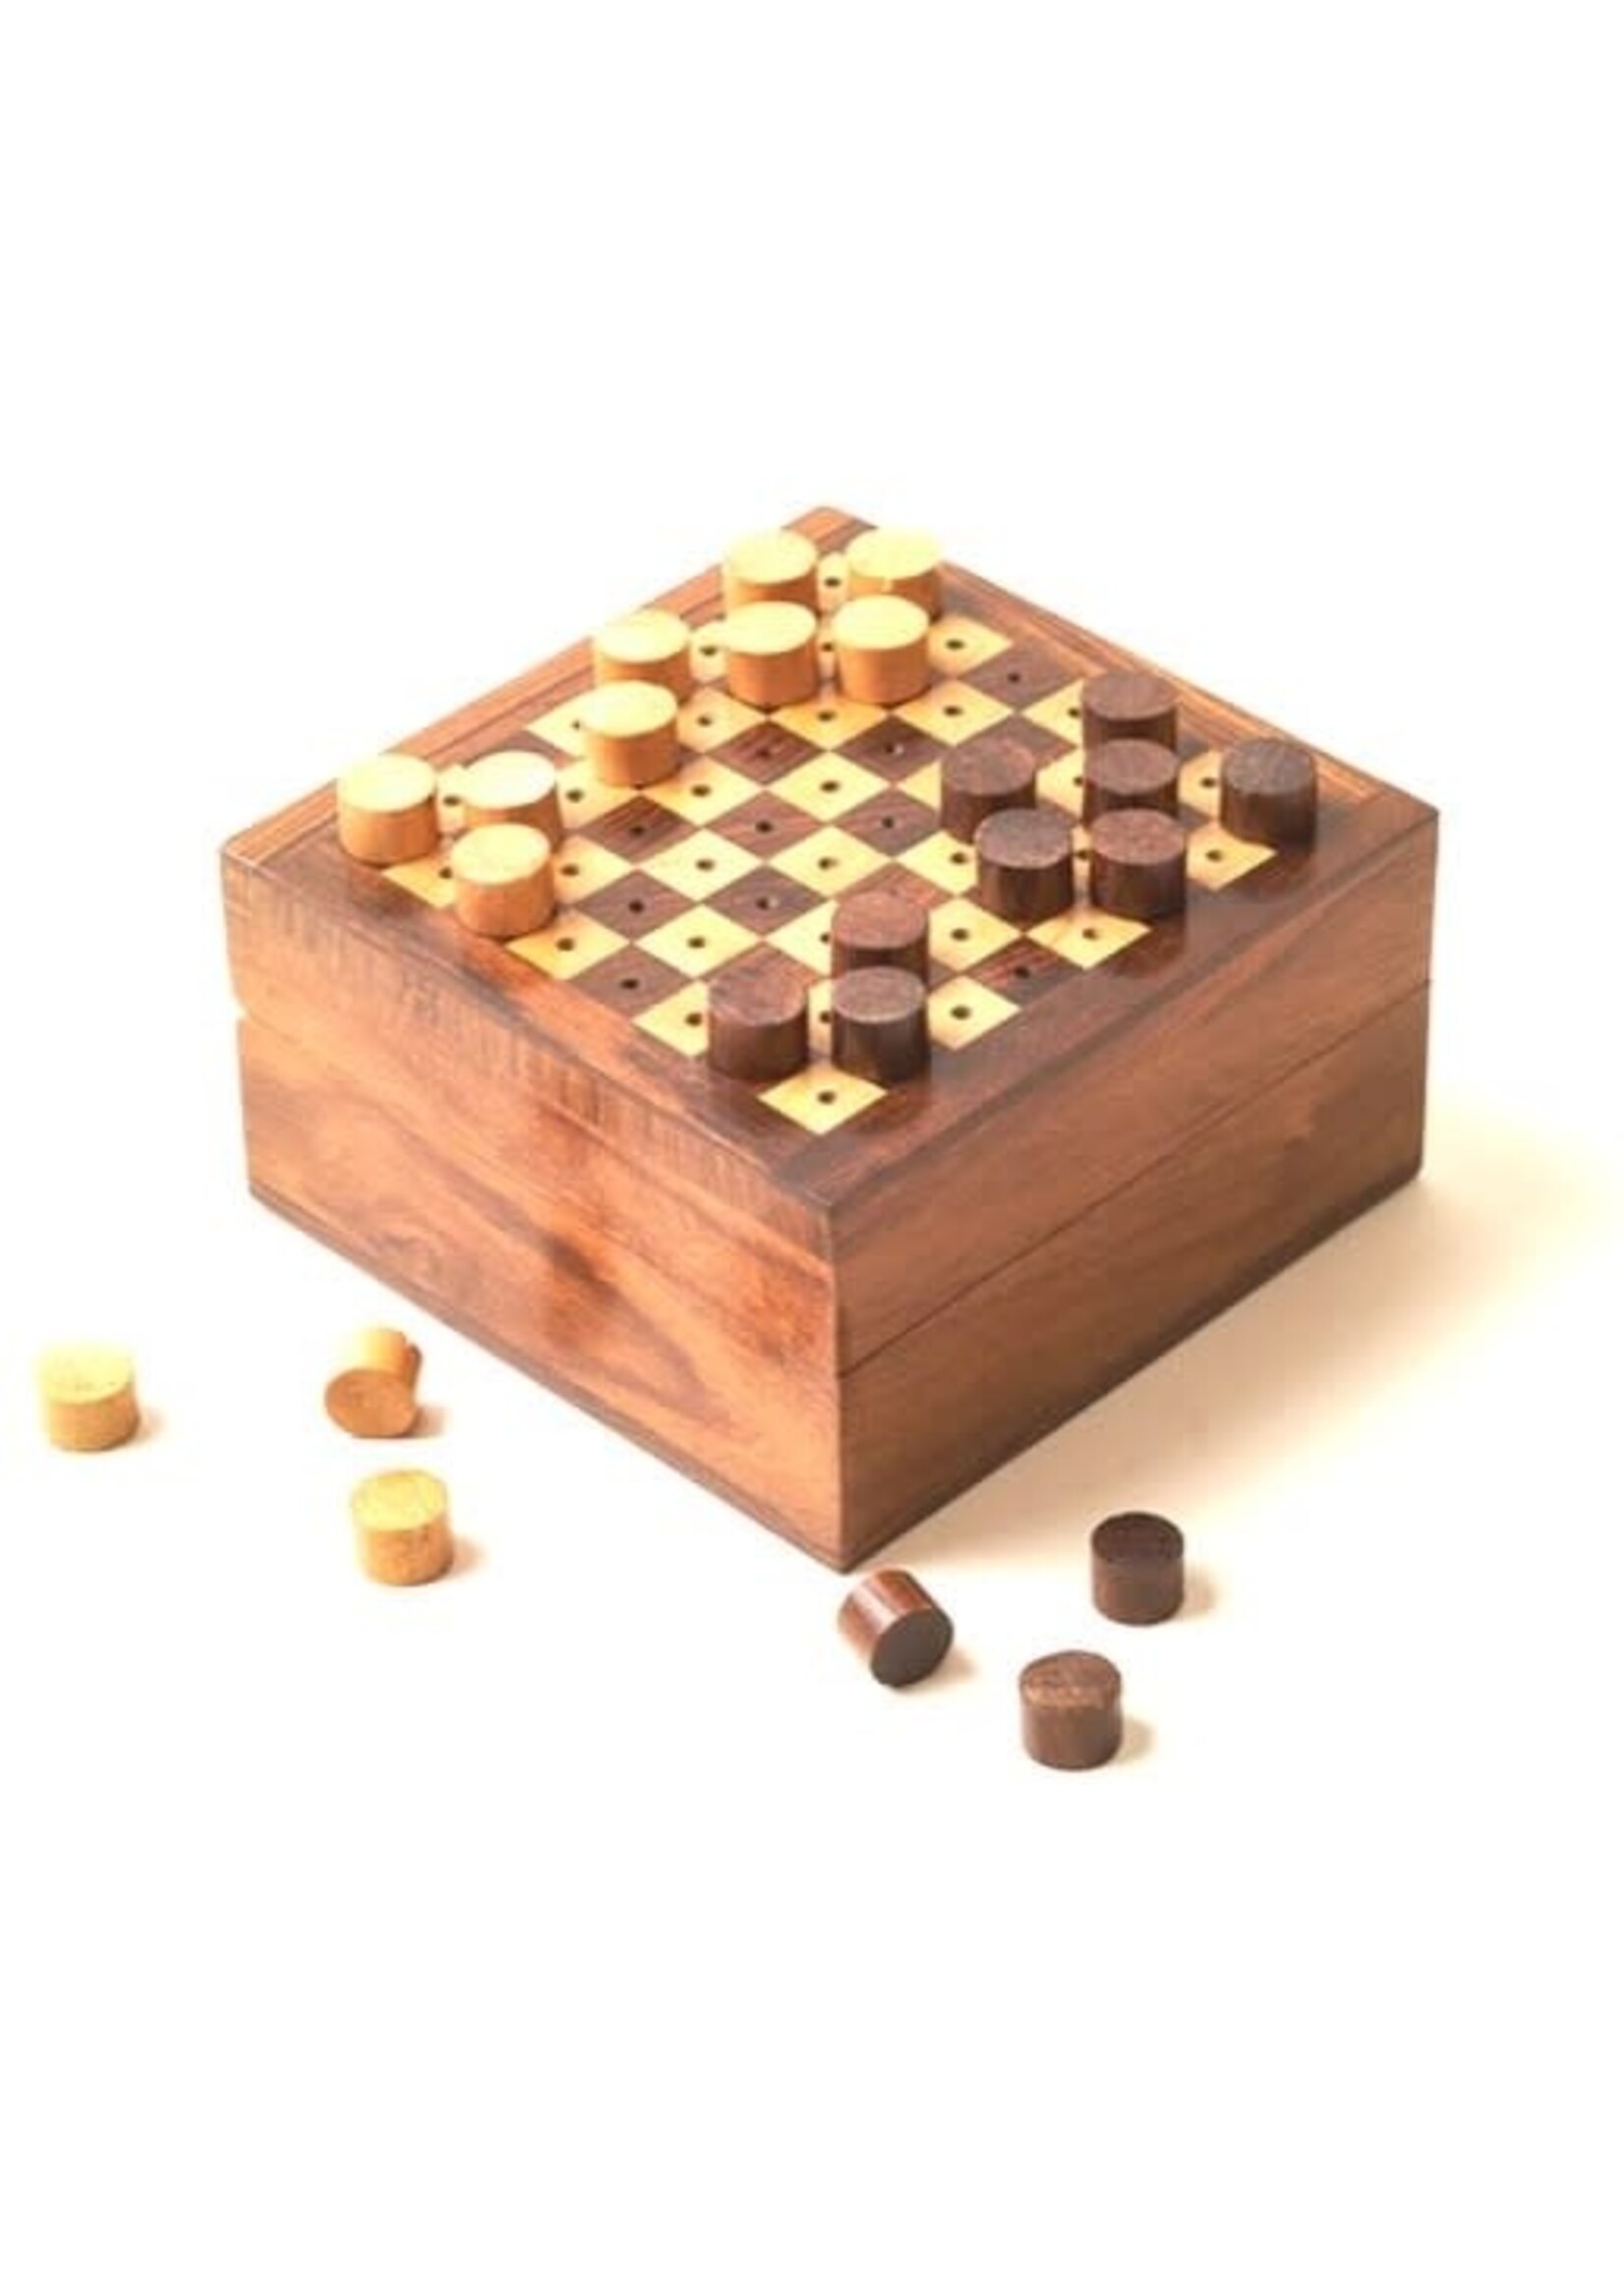 Mini Travel Chess and Checkers Game Set - Handcrafted Wood